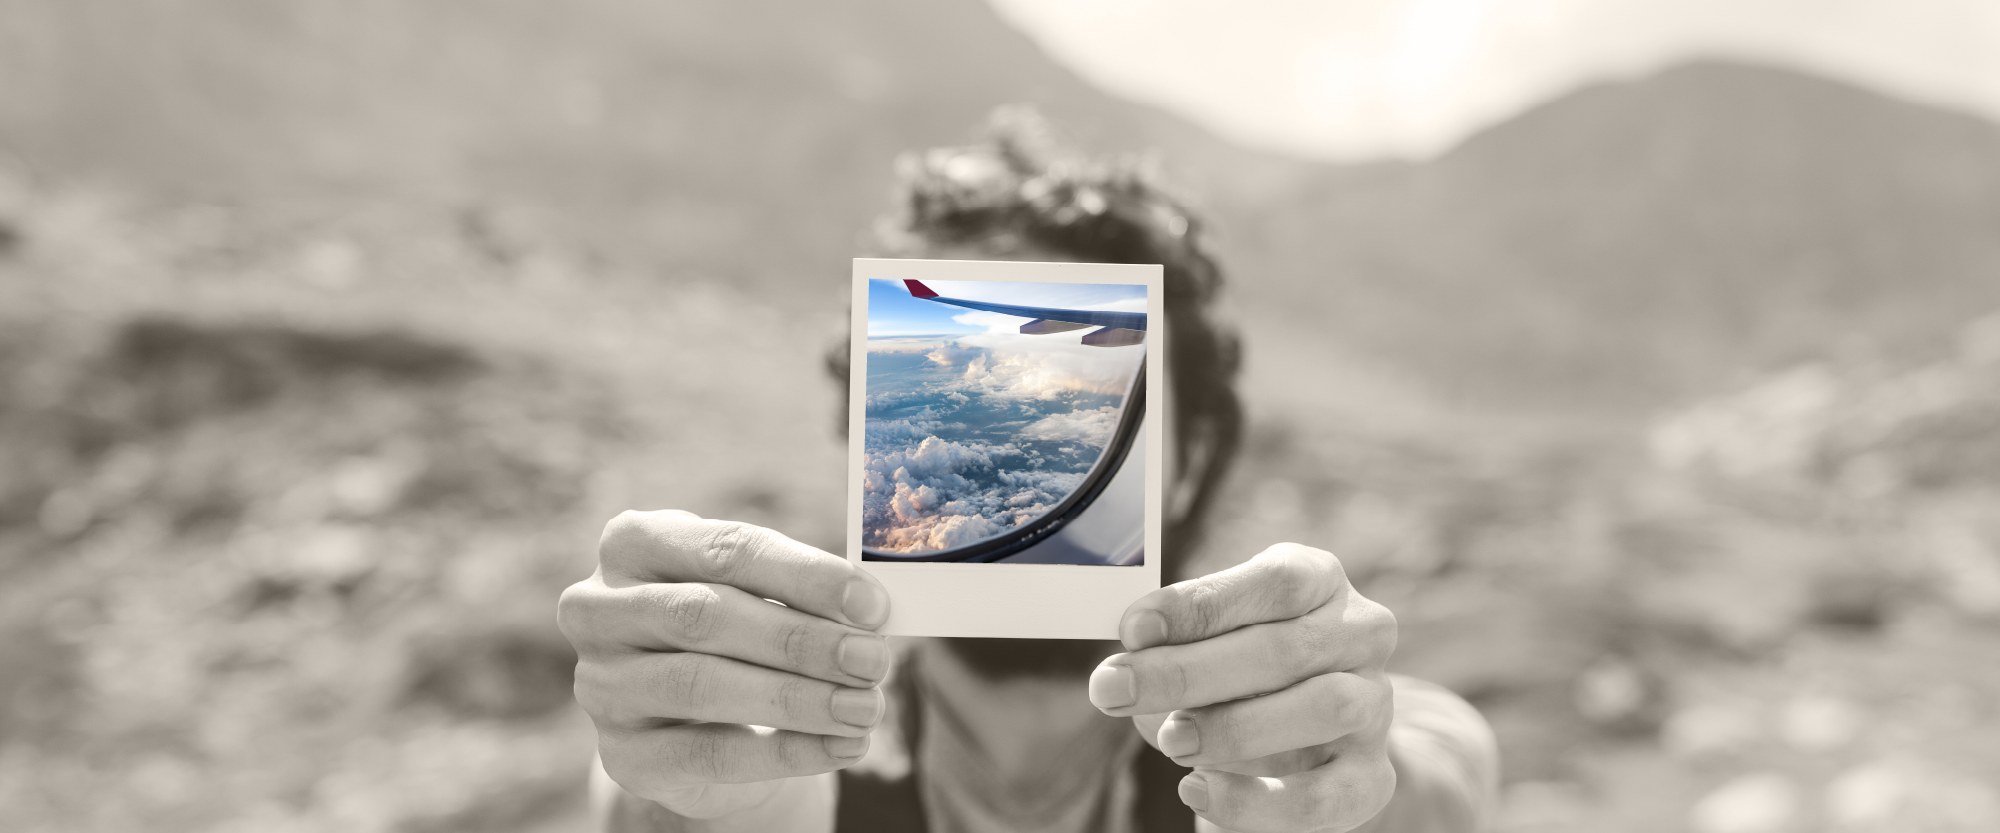 Person holding polaroid picture of airline flight